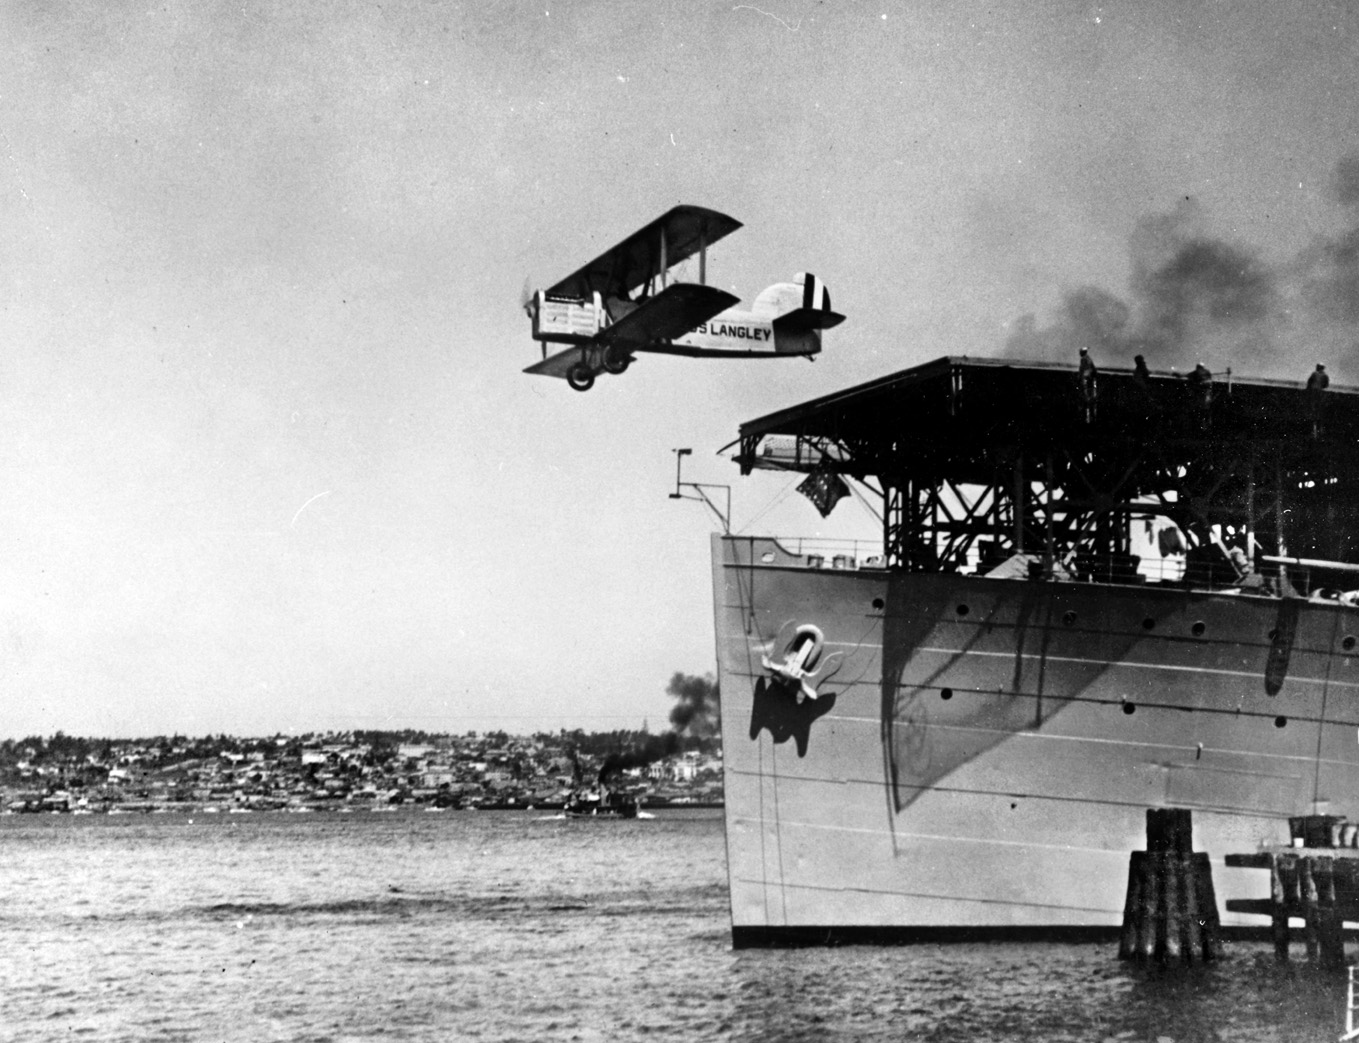 A DT-2 biplane takes off from the deck of the Langley in 1925. A number of pioneer aviators of the U.S. Navy underwent training aboard the Langley and later served during World War II.